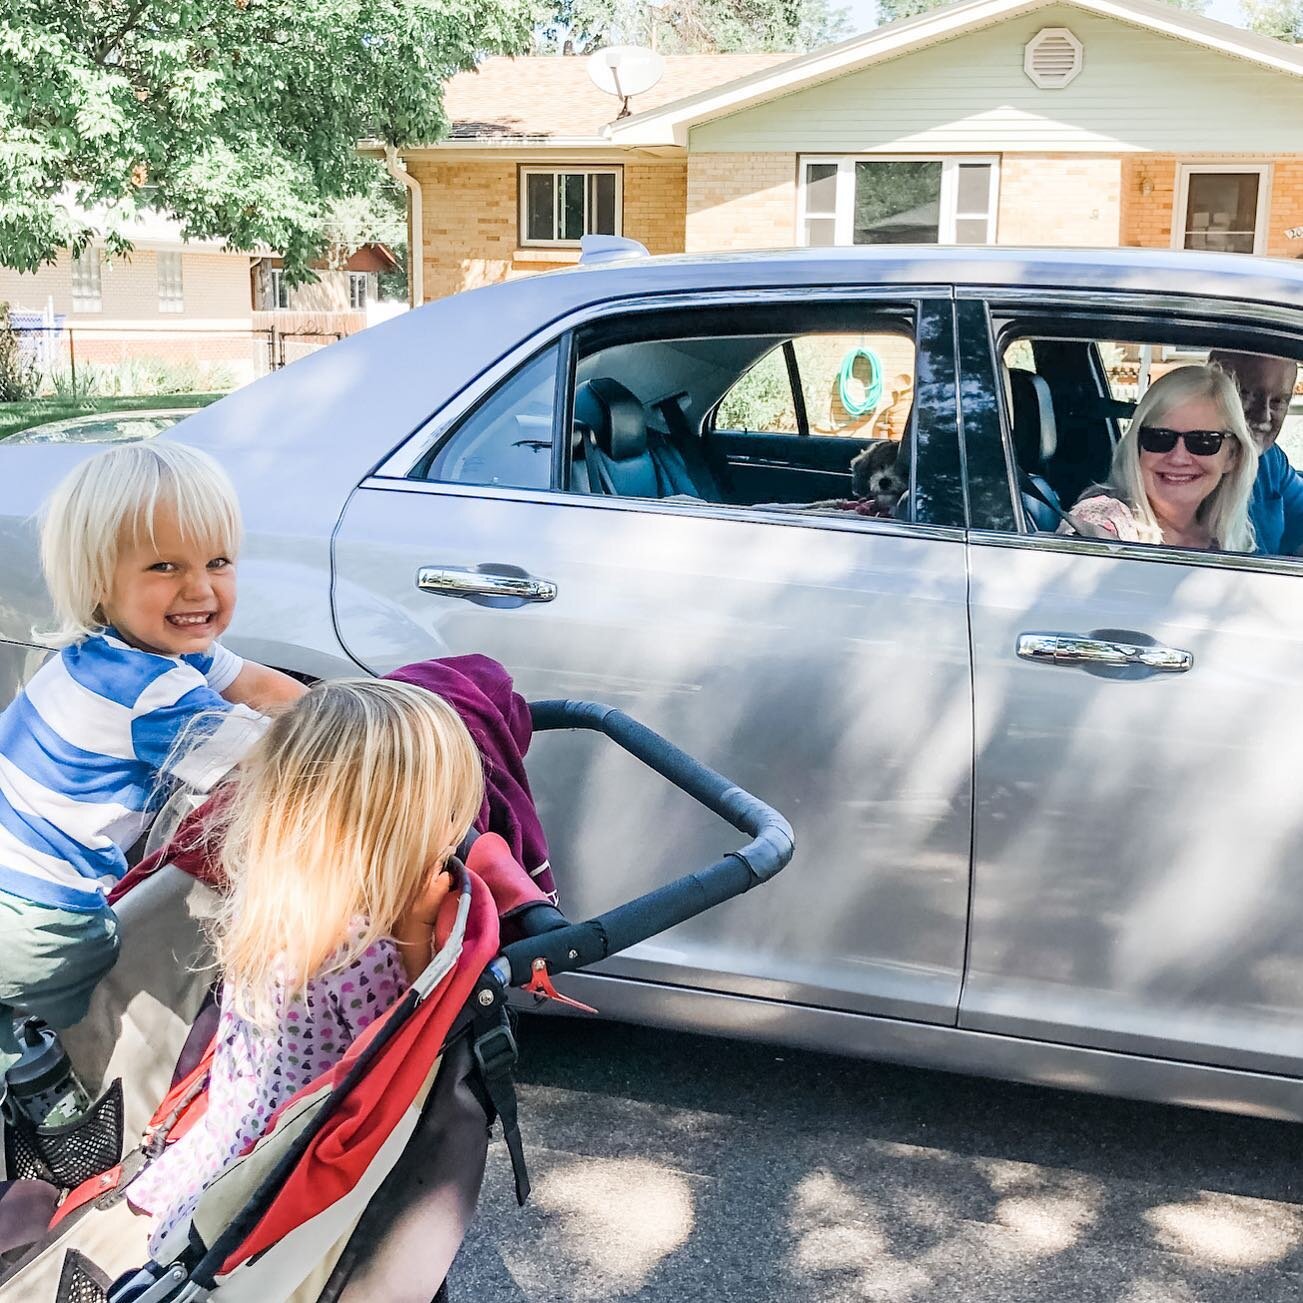 In the 7 years we've lived on our block, 2 out of 12 houses have seen owners turnover. So for the most part, it's been pretty consistent. 

But Cindy was one of the ones who got away. 

We caught her and the man who whisked her away driving down the 